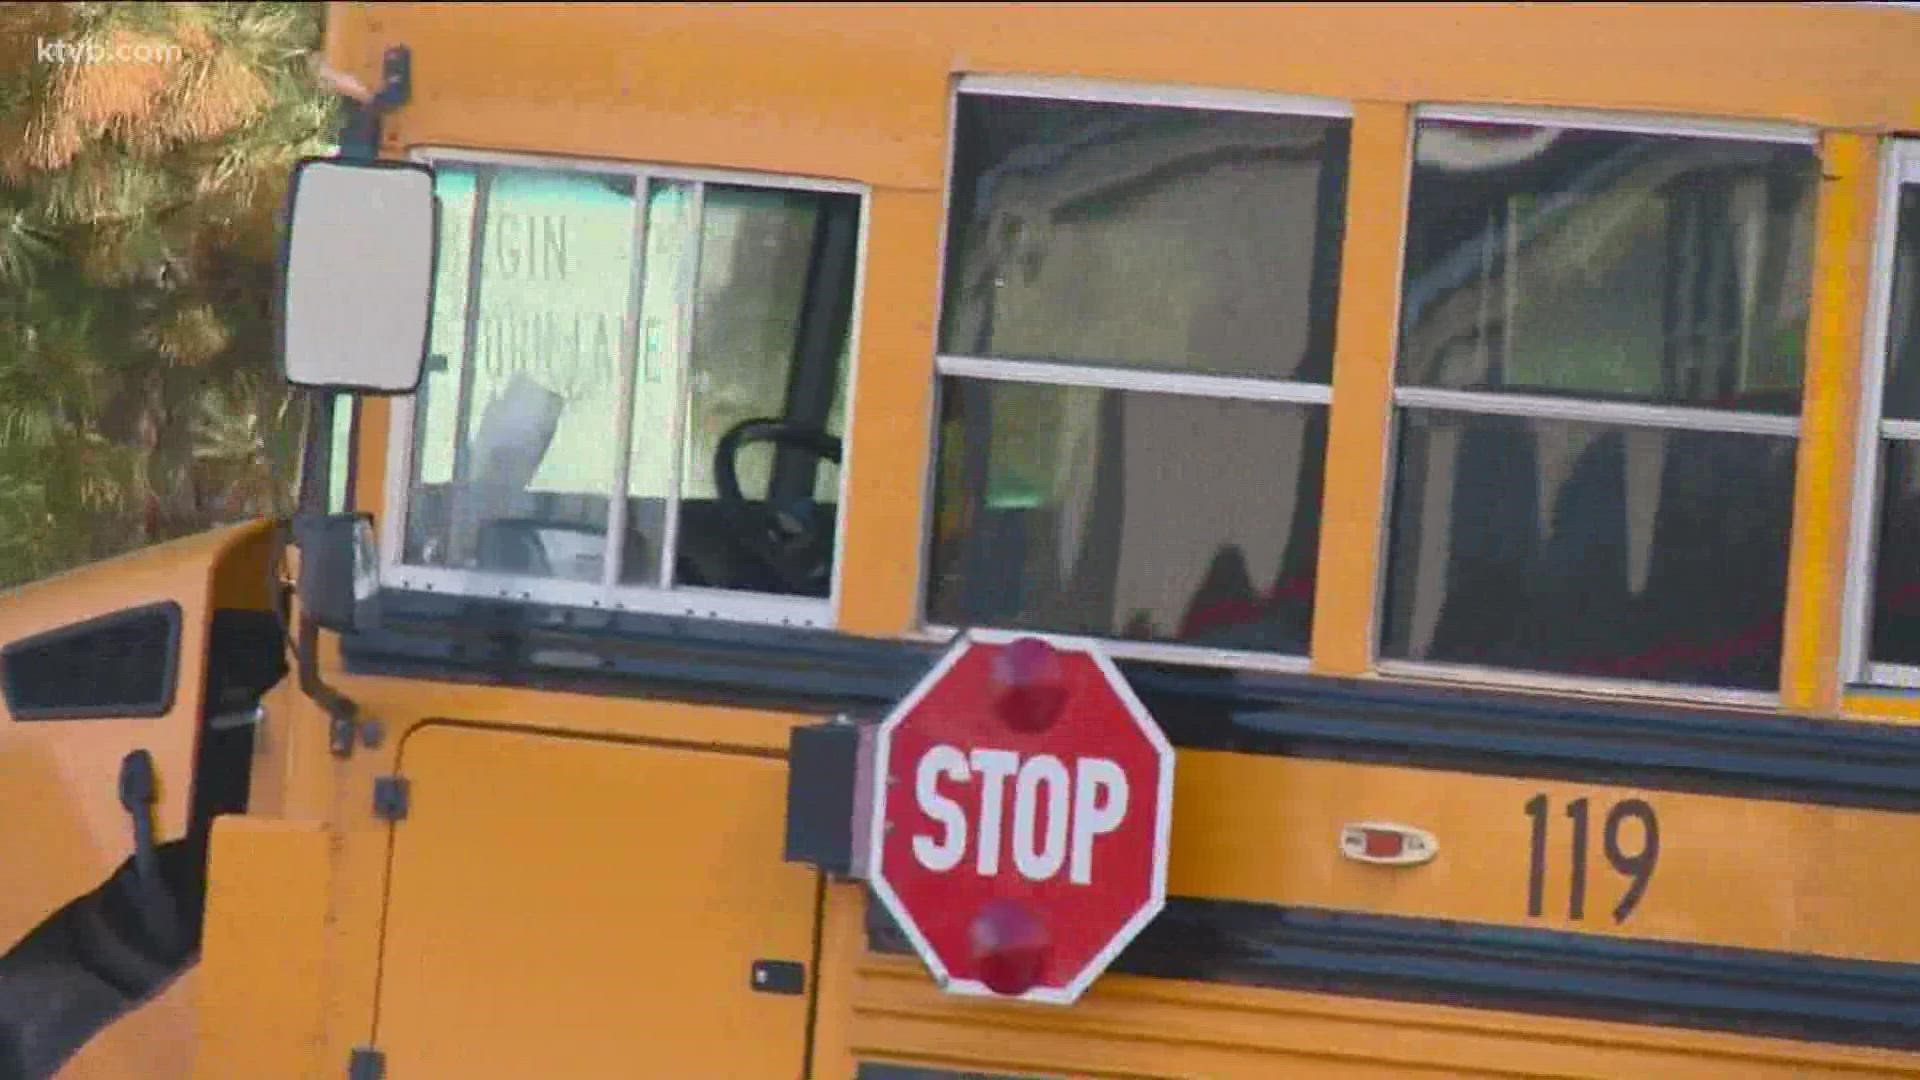 According to officials, children were on the bus but none were injured and they're all reunited with their families.